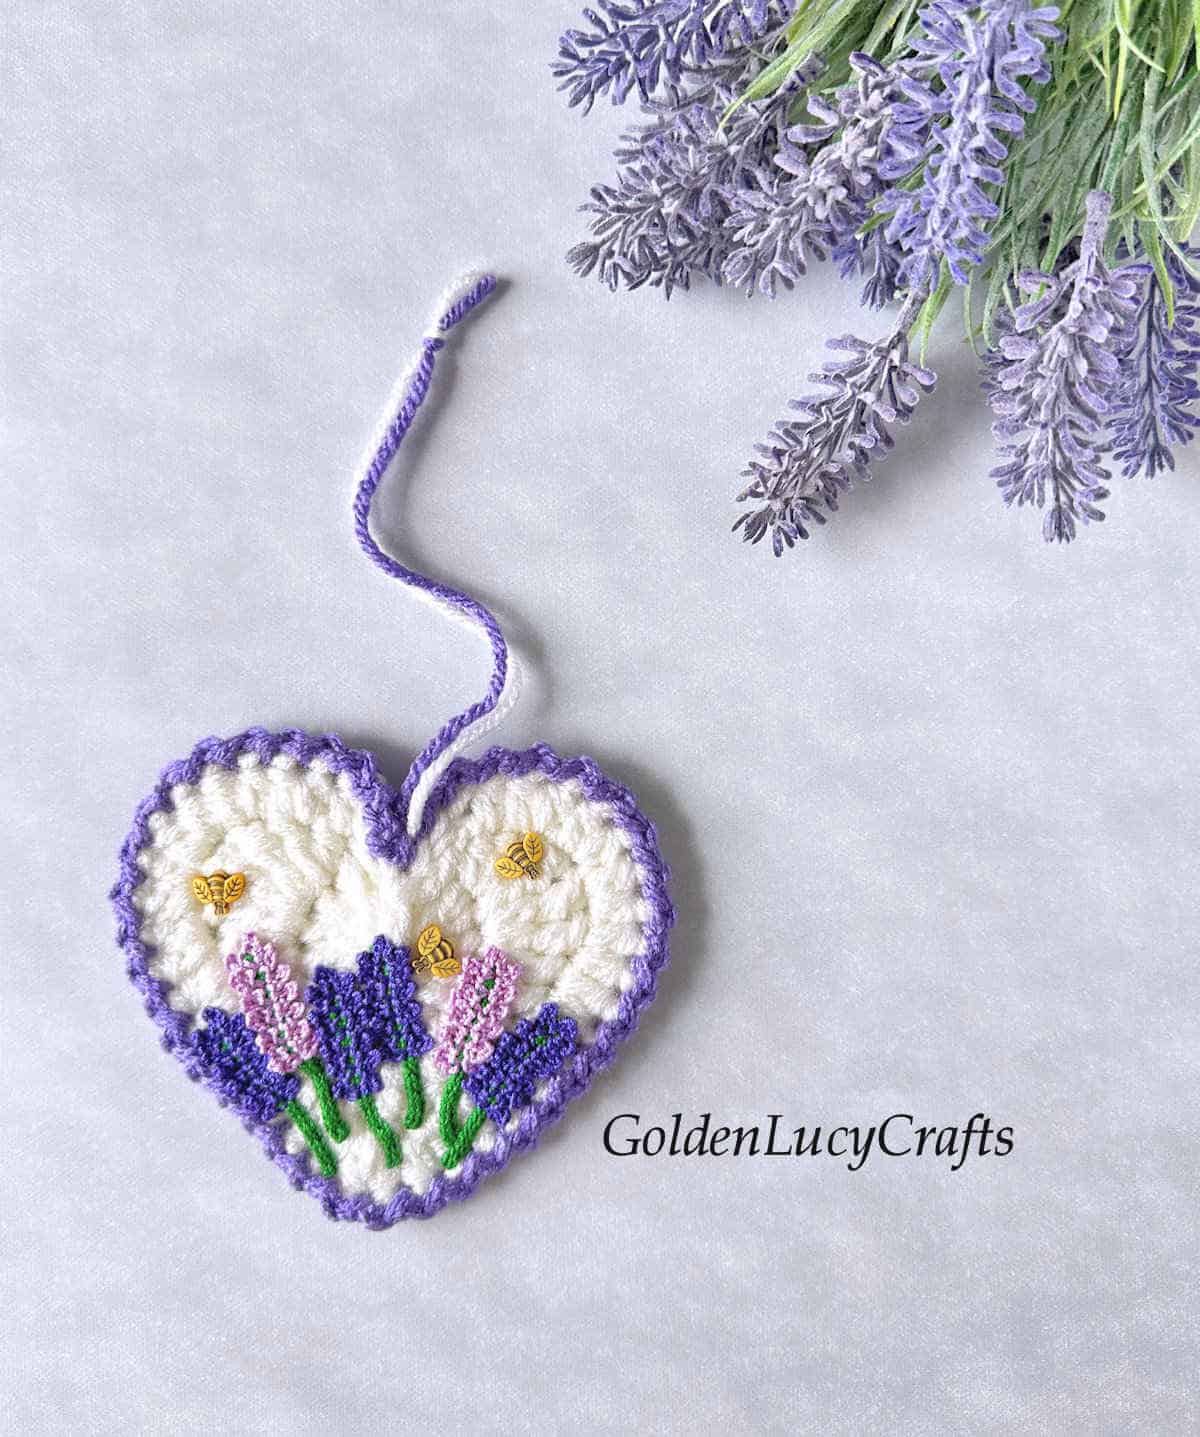 A crocheted heart with lavender flower appliques and bee buttons attached to it.